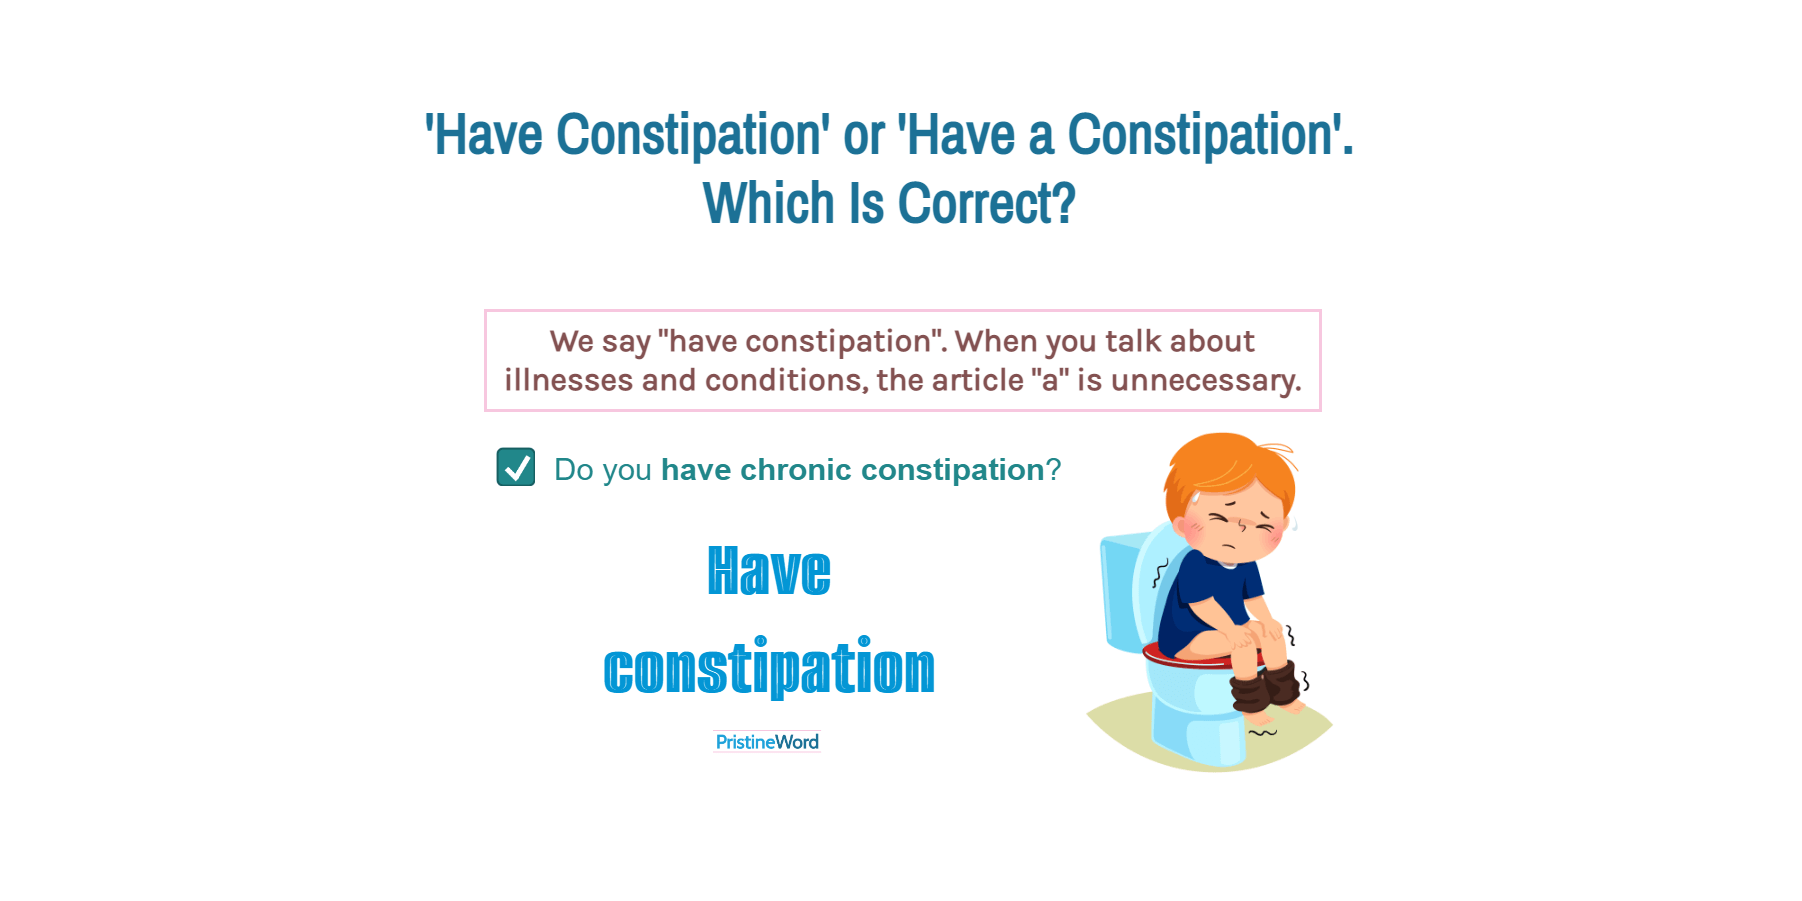 Have Constipation or Have a Constipation. Which Is Correct?